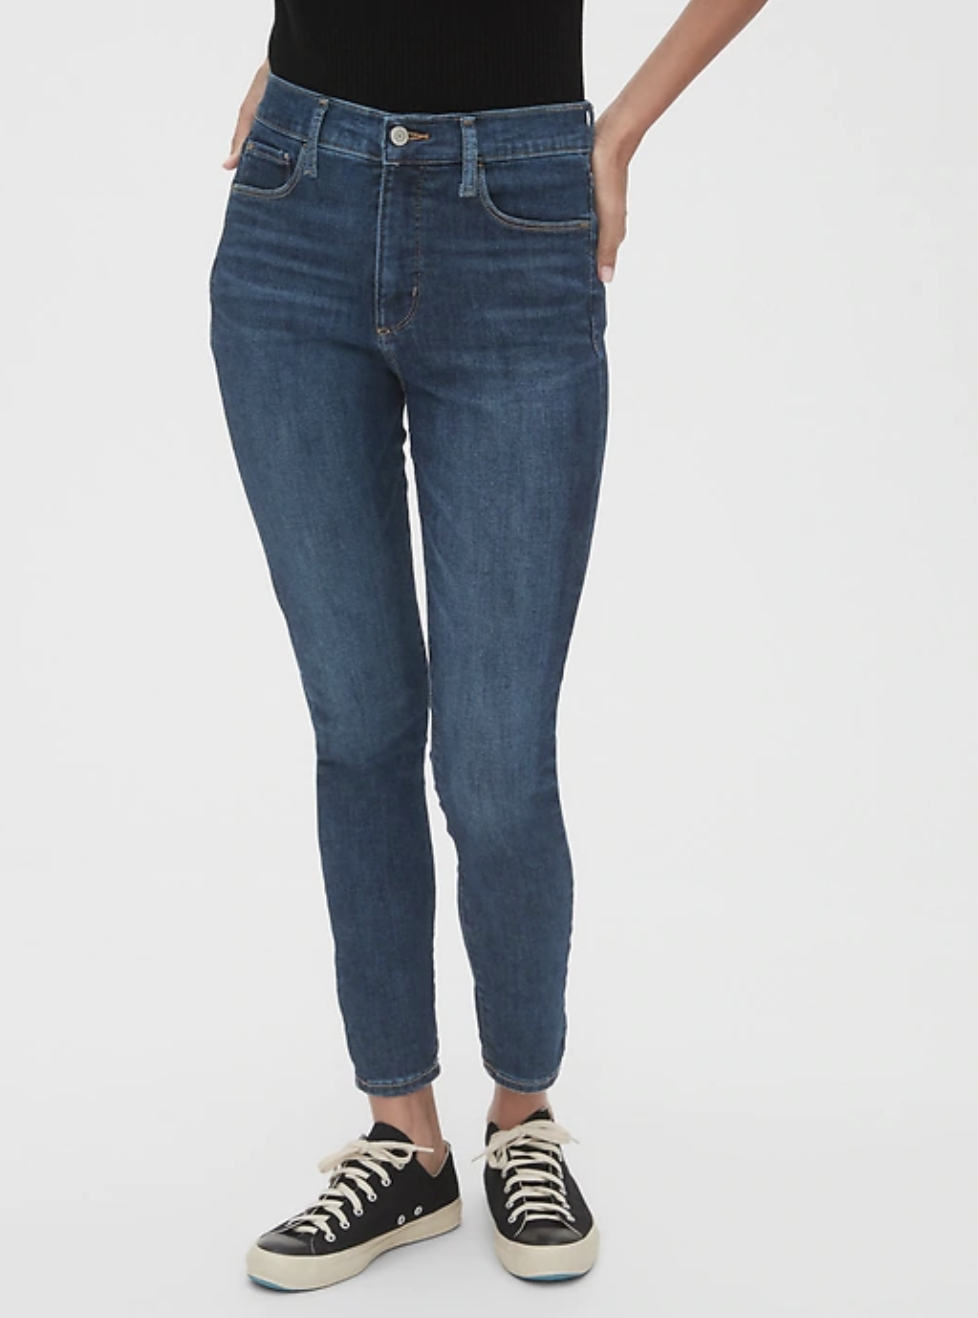 gap straight jeans, best jeans for each zodiac sign